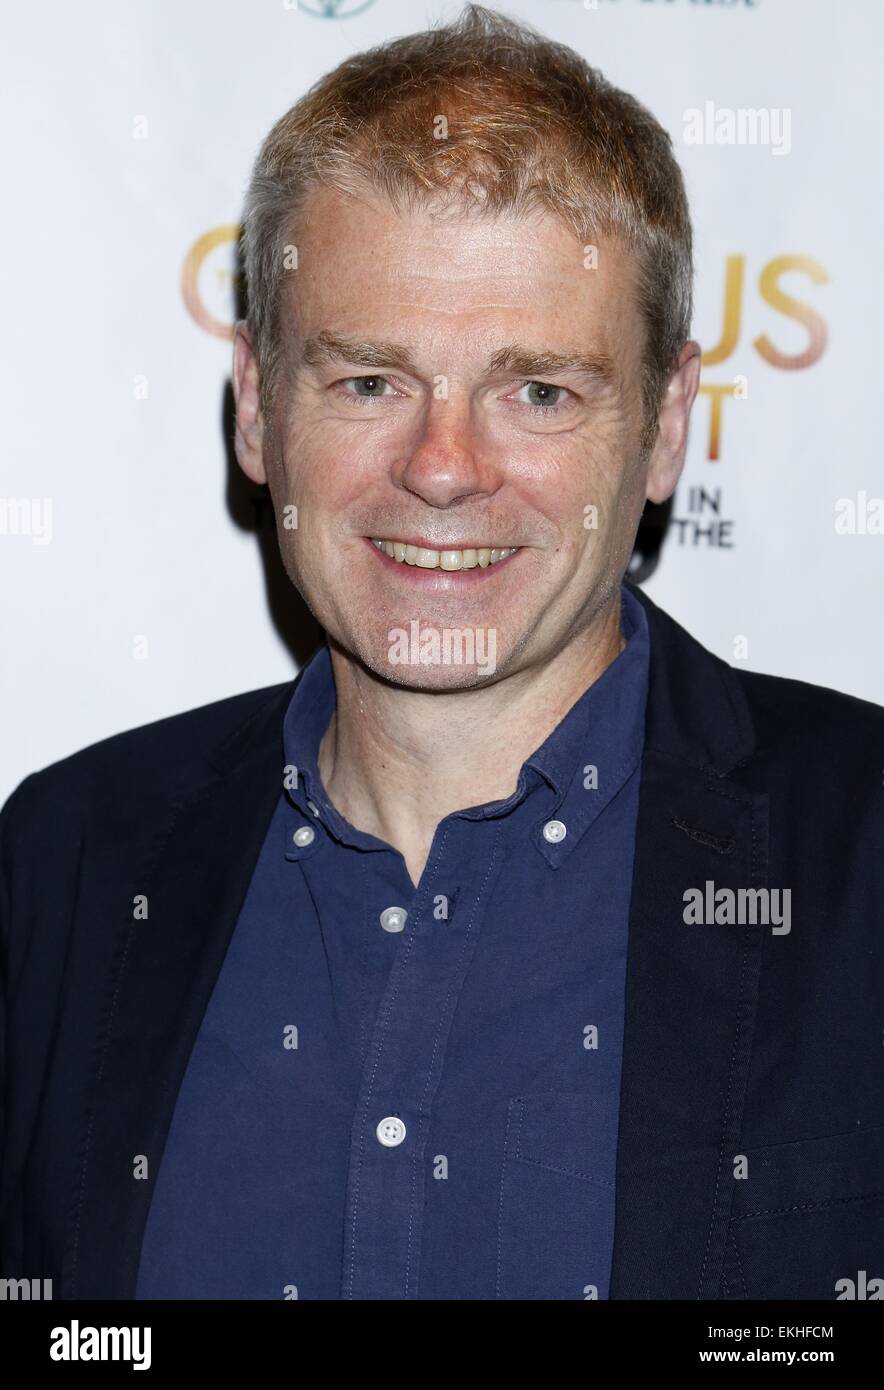 Opening night of The Curious Incident of the Dog in the Night-Time at the Barrymore Theatre - Arrivals.  Featuring: Mark Haddon Where: New York, New York, United States When: 05 Oct 2014 Stock Photo